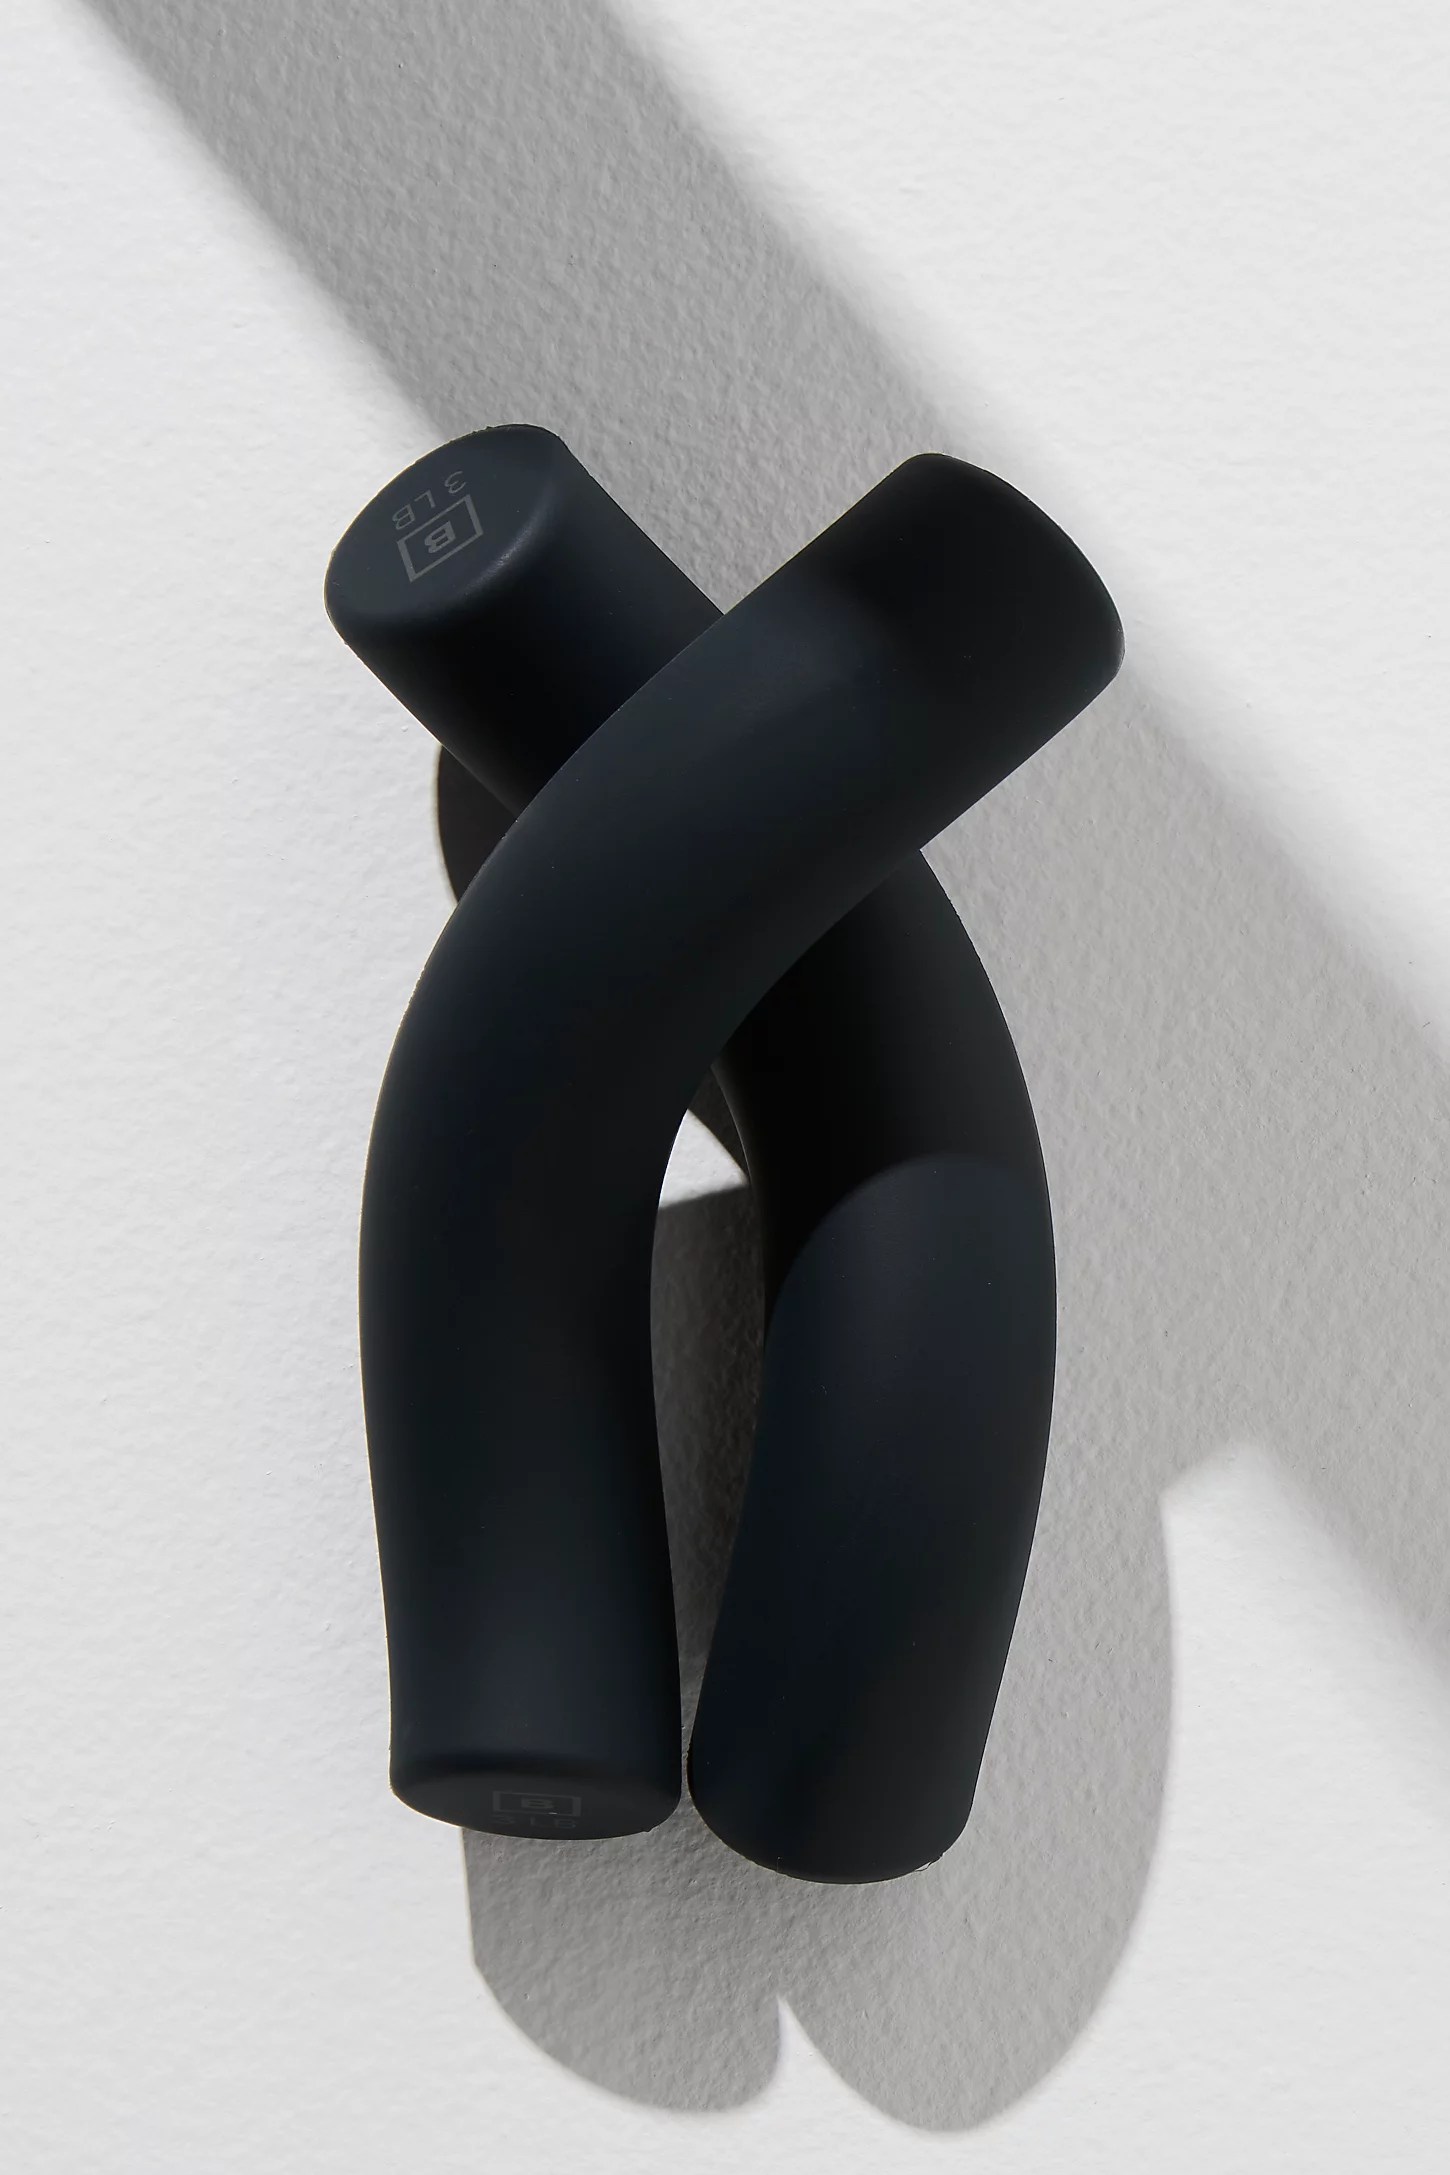 a set of two black b yoga helix weights, at-home pilates equipment